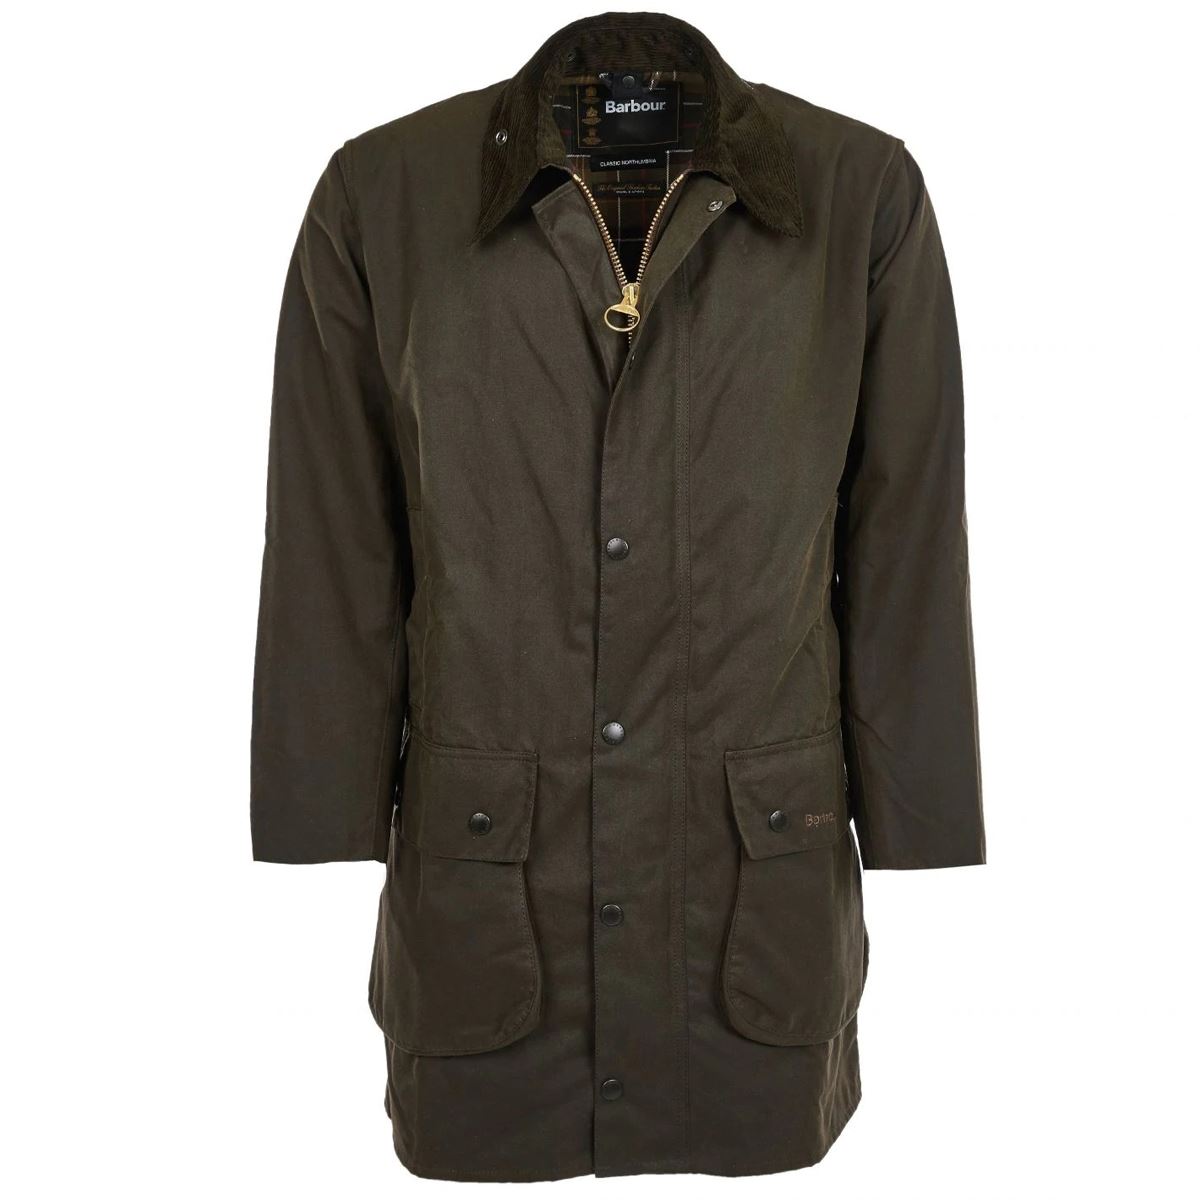 What is the suitable hood for the Barbour Northumbria Jacket?